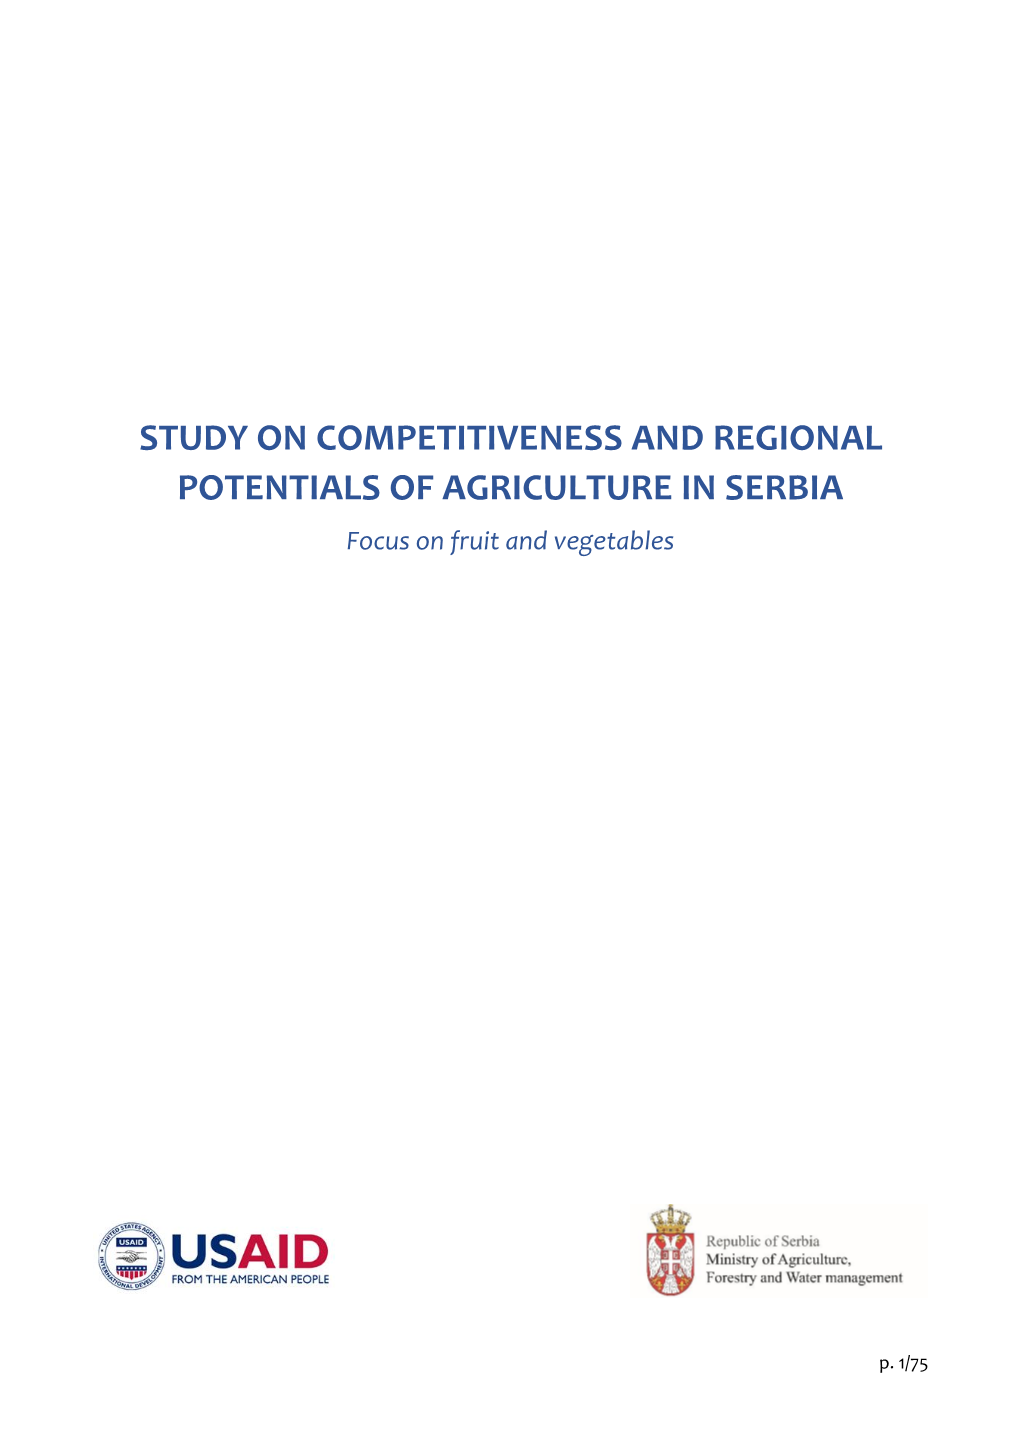 STUDY on COMPETITIVENESS and REGIONAL POTENTIALS of AGRICULTURE in SERBIA Focus on Fruit and Vegetables